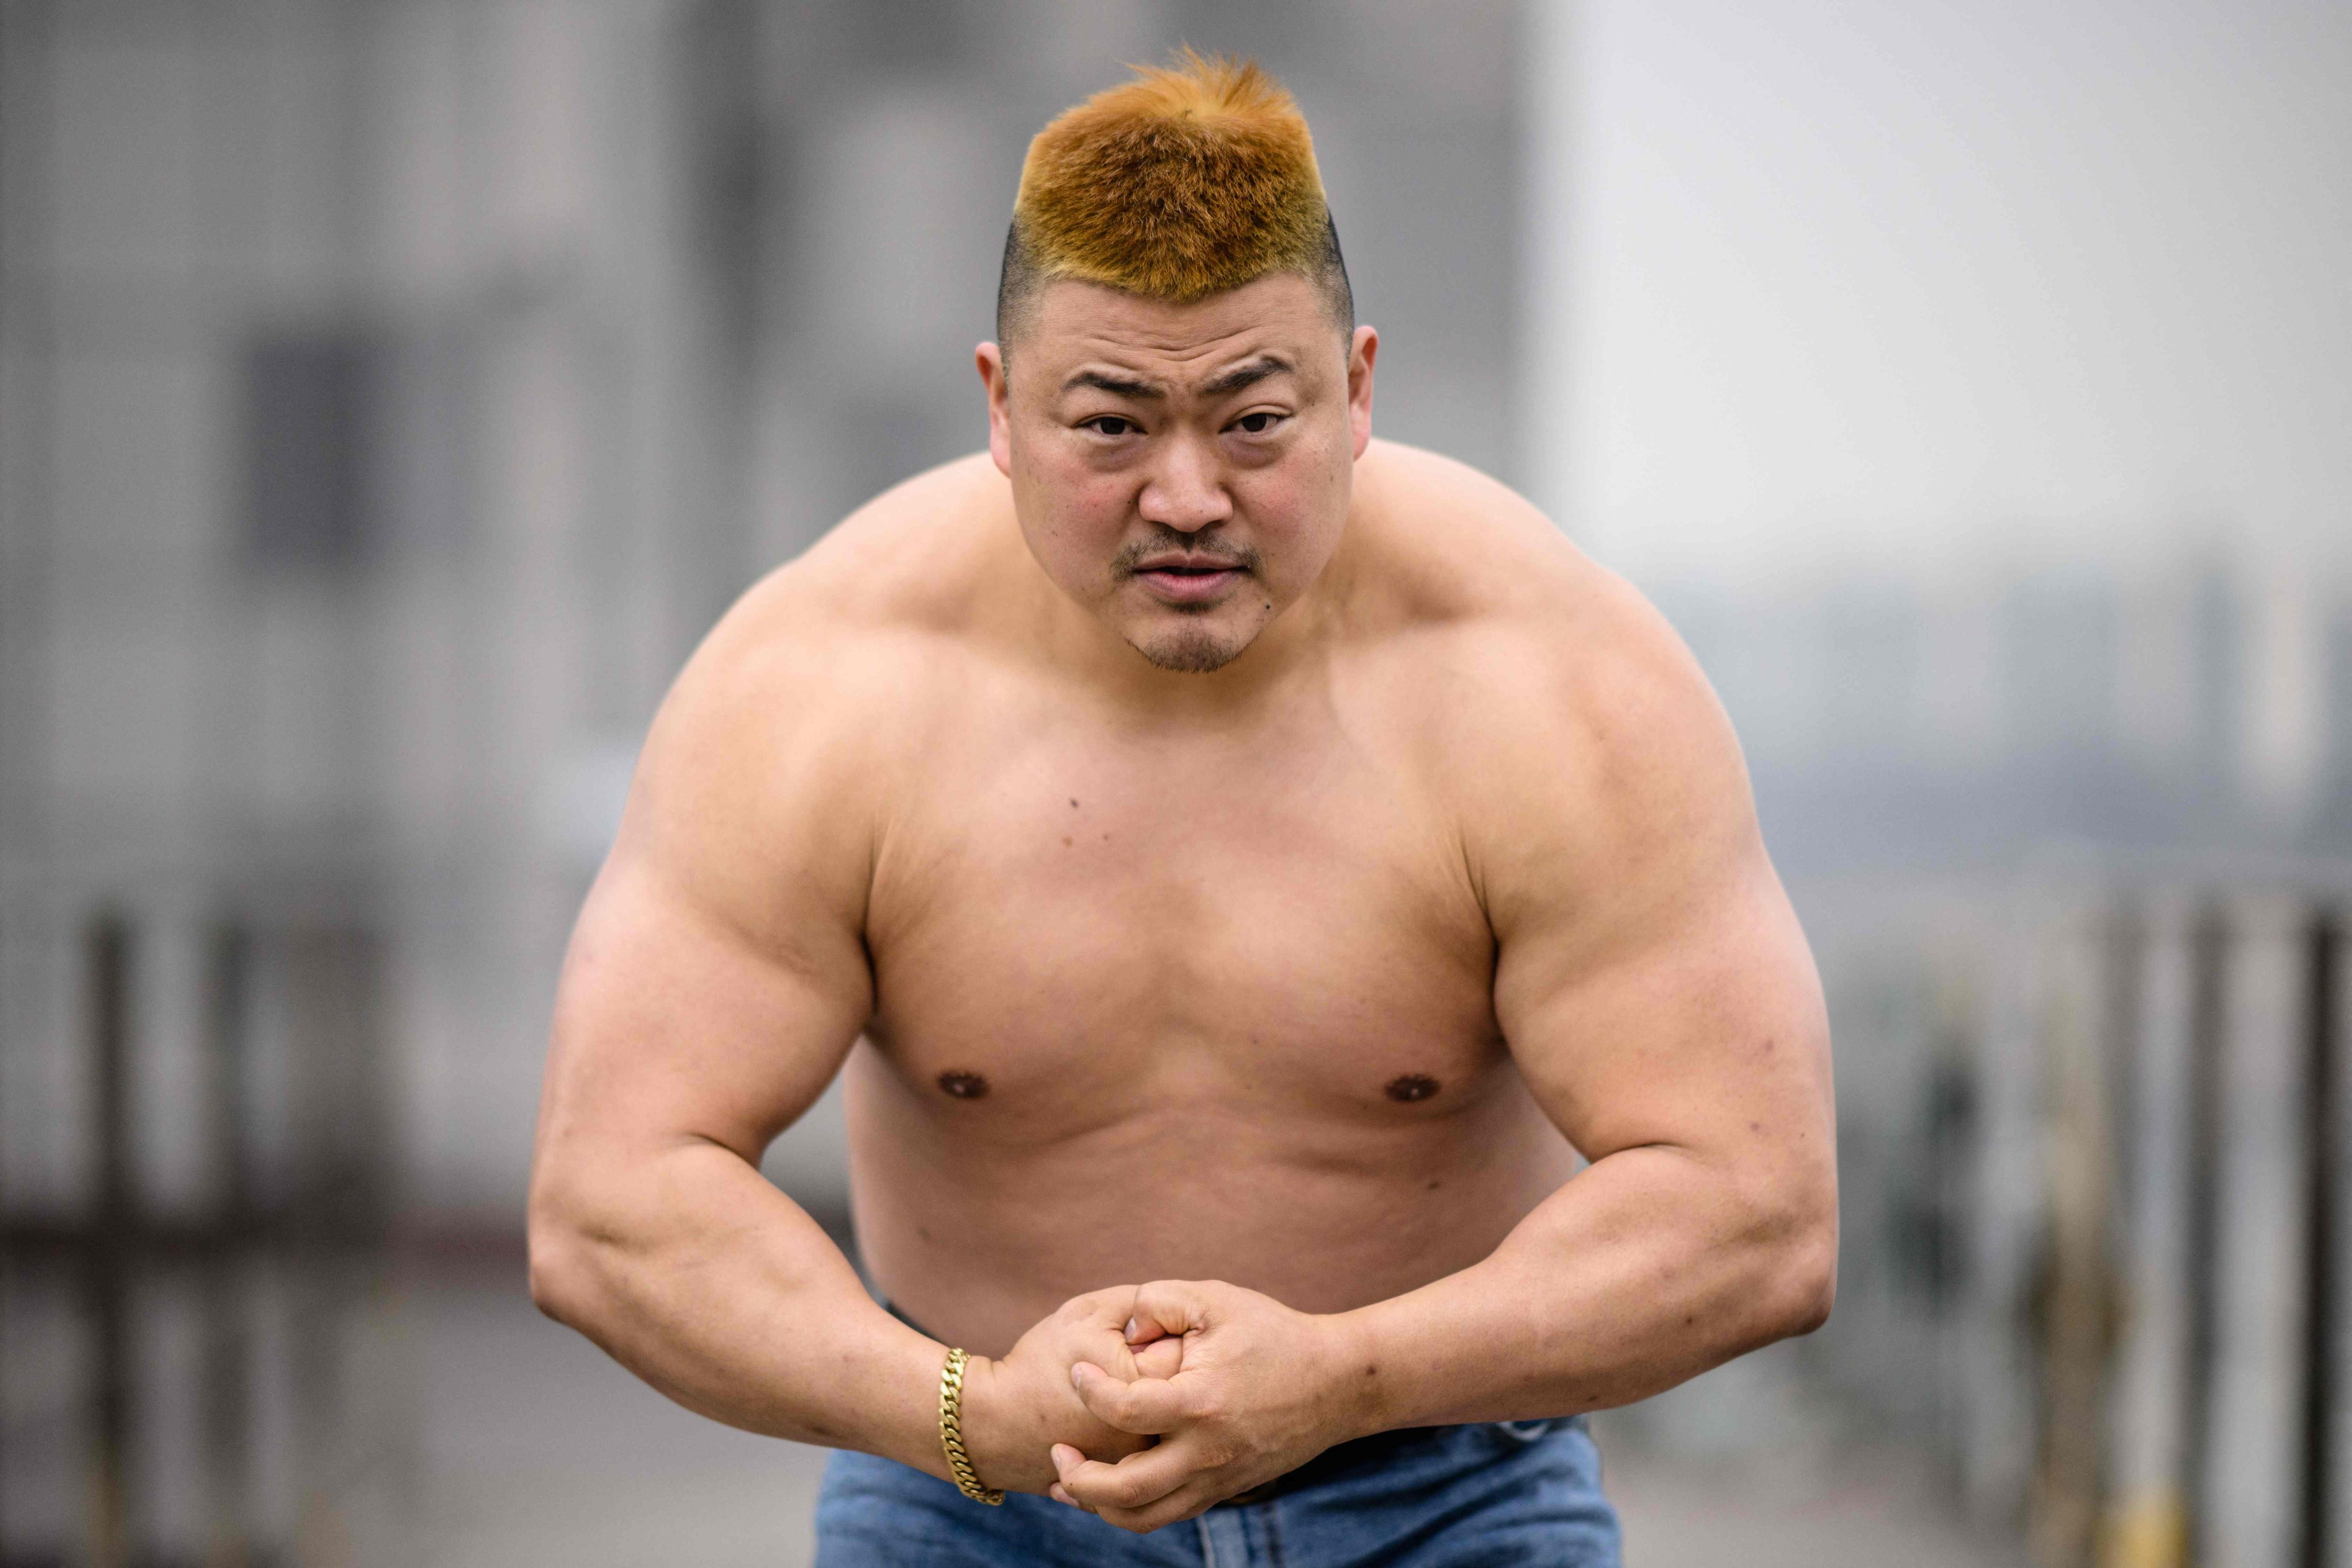 South Korean car dealer Jo Jin-hyeong, a contestant on the new Netflix show “Physical: 100”, poses during an interview in Seoul. Photo: AFP